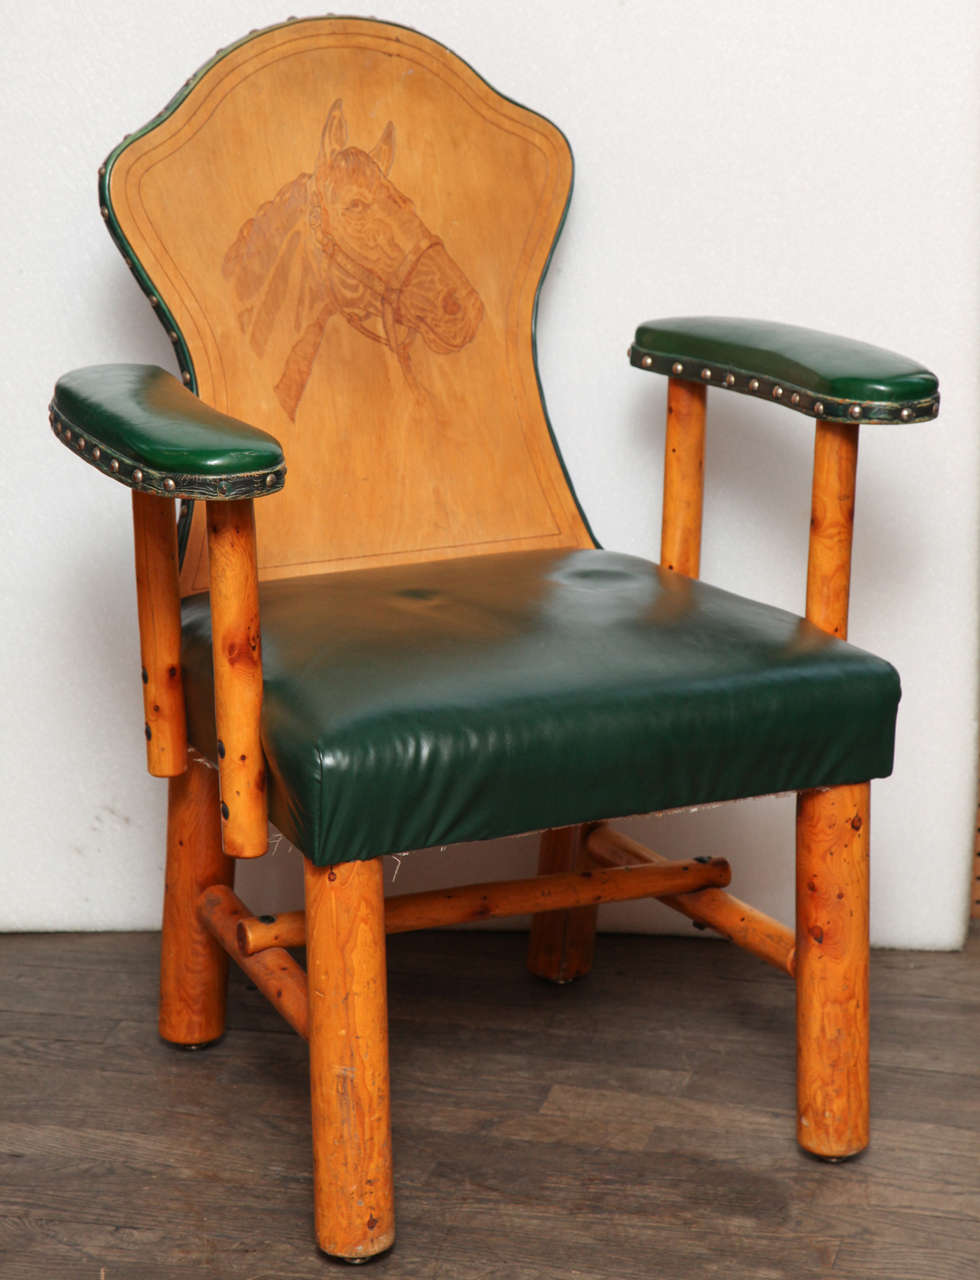 In the style of Western Furniture Designer, Thomas Molesworth, who’s Shoshone Furniture Company (Cody, Wyoming) combined the craftsmanship of the Arts & Crafts movement with the character of the American West and launched the cowboy style which